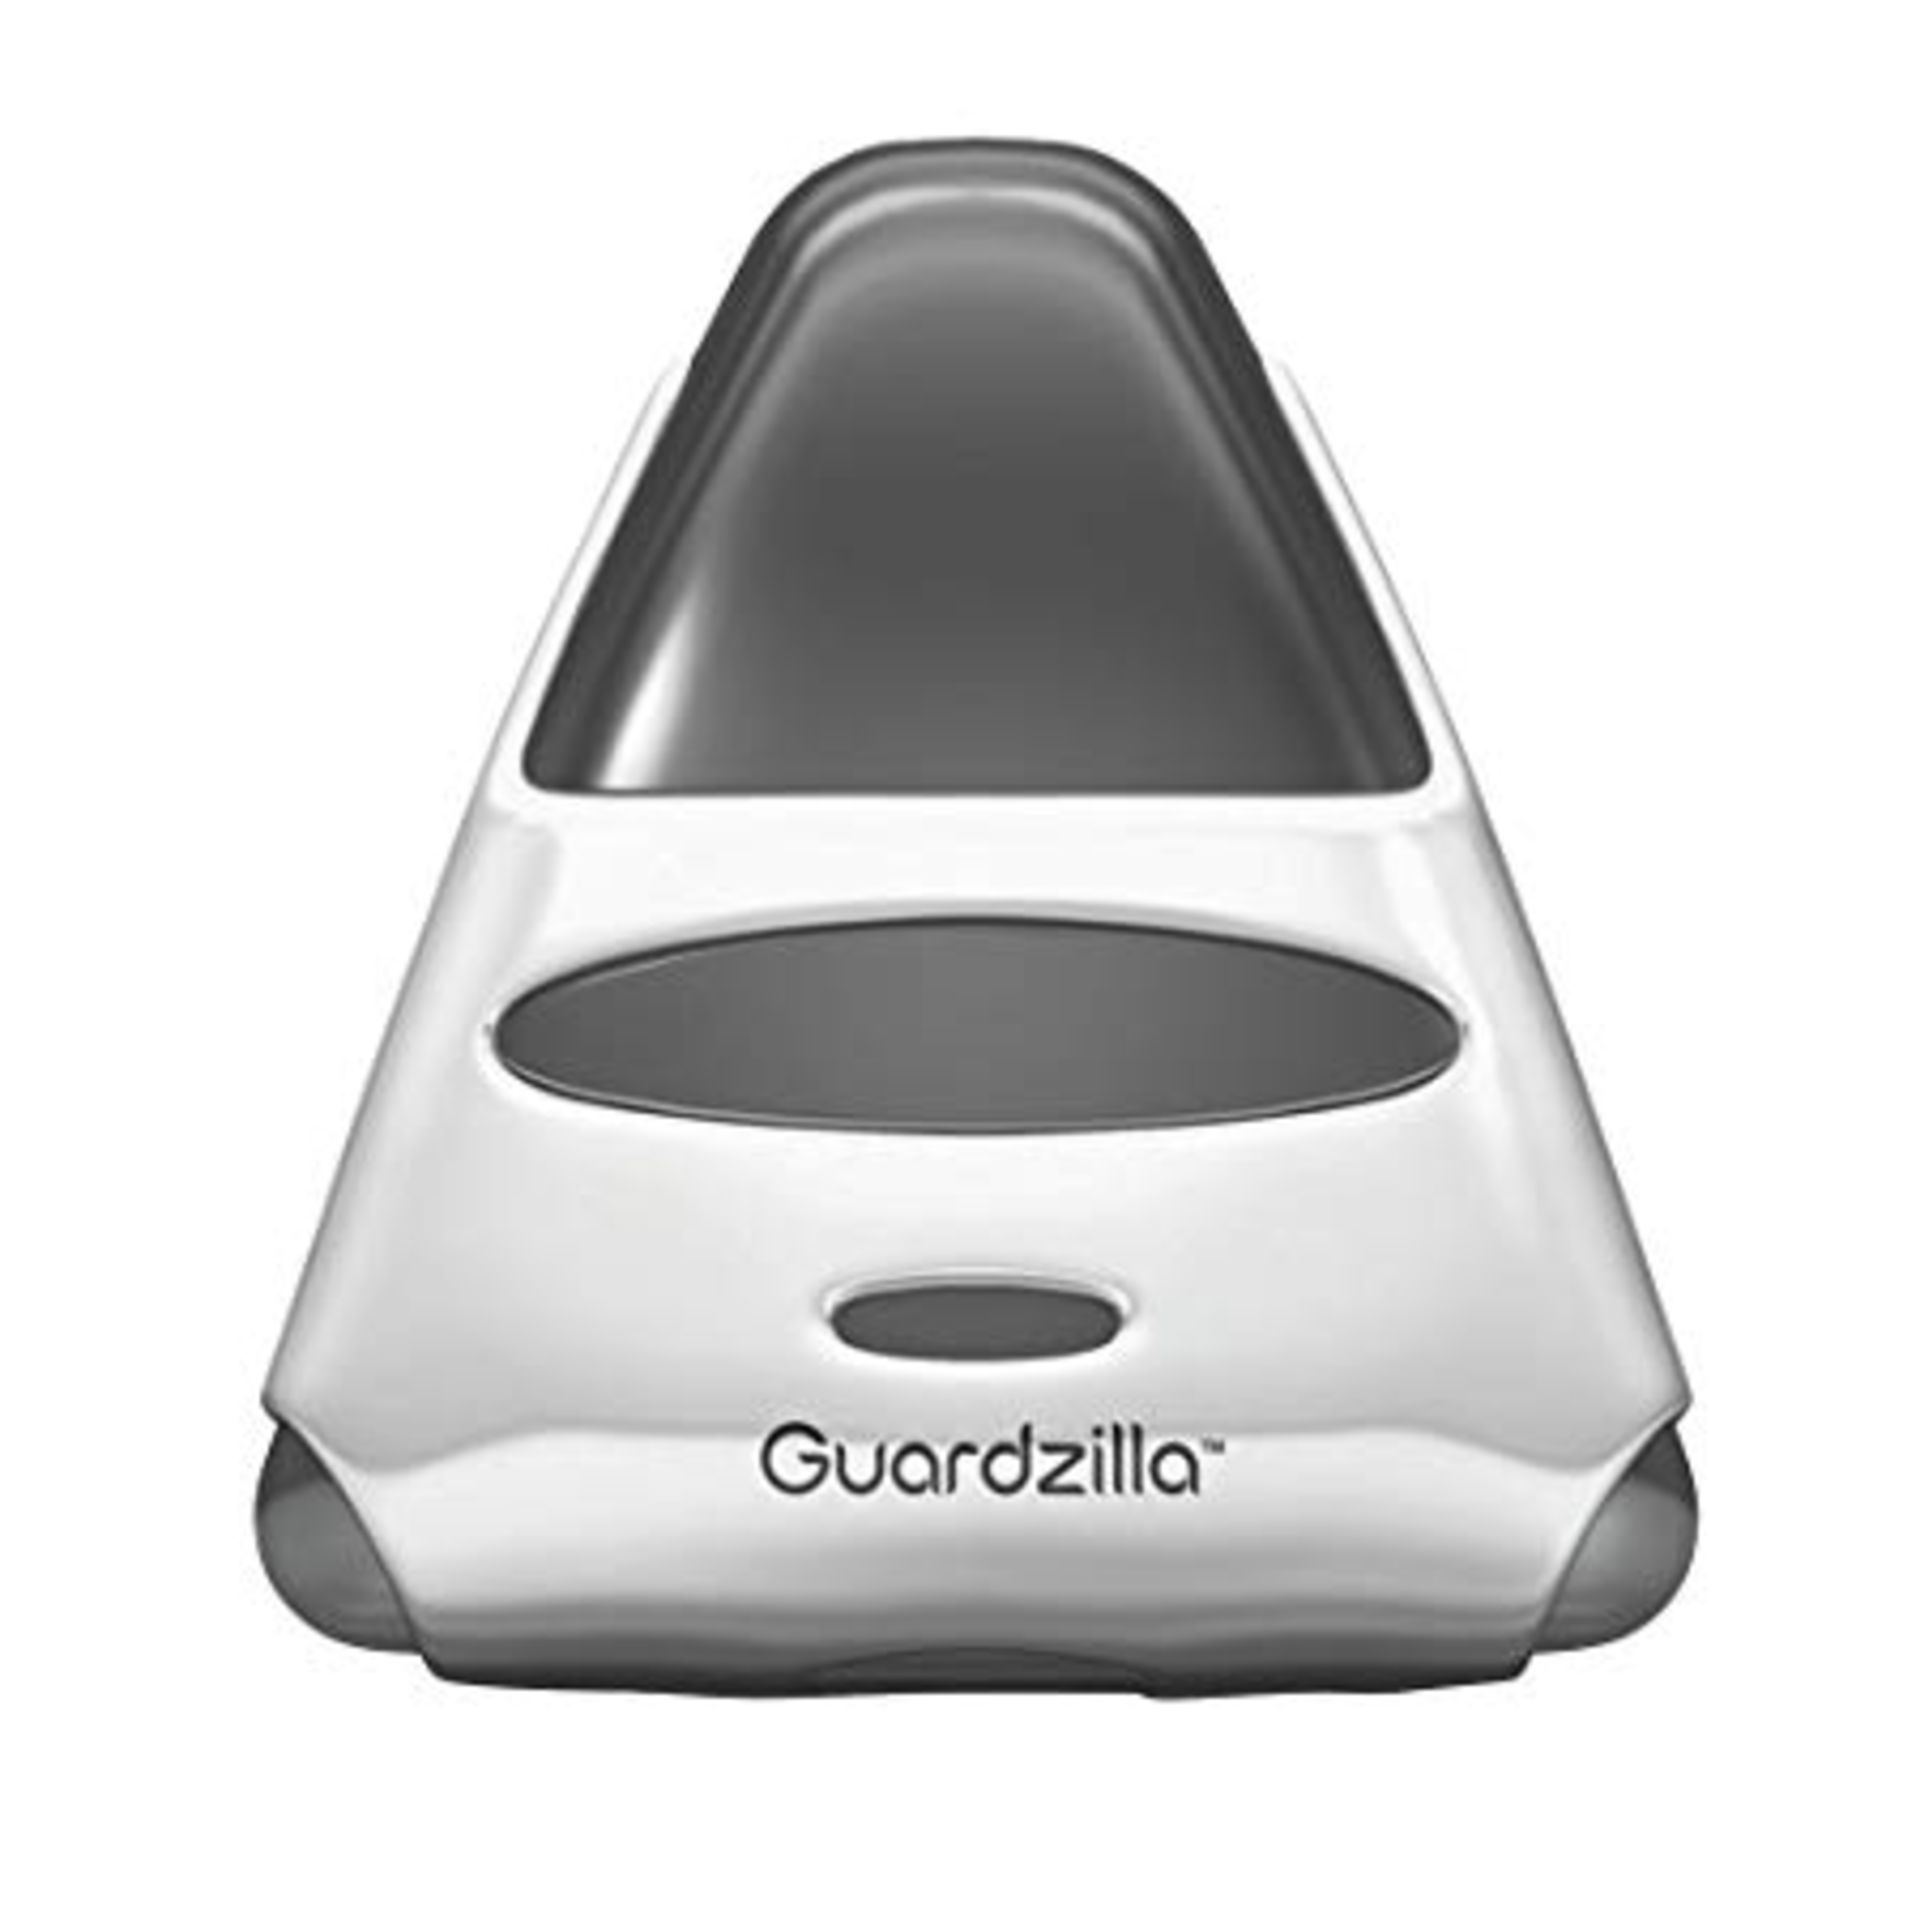 5 x Guardzilla All-In-One HD Security System Including Camera + Siren + Smartphone Remote Capability - Image 2 of 5